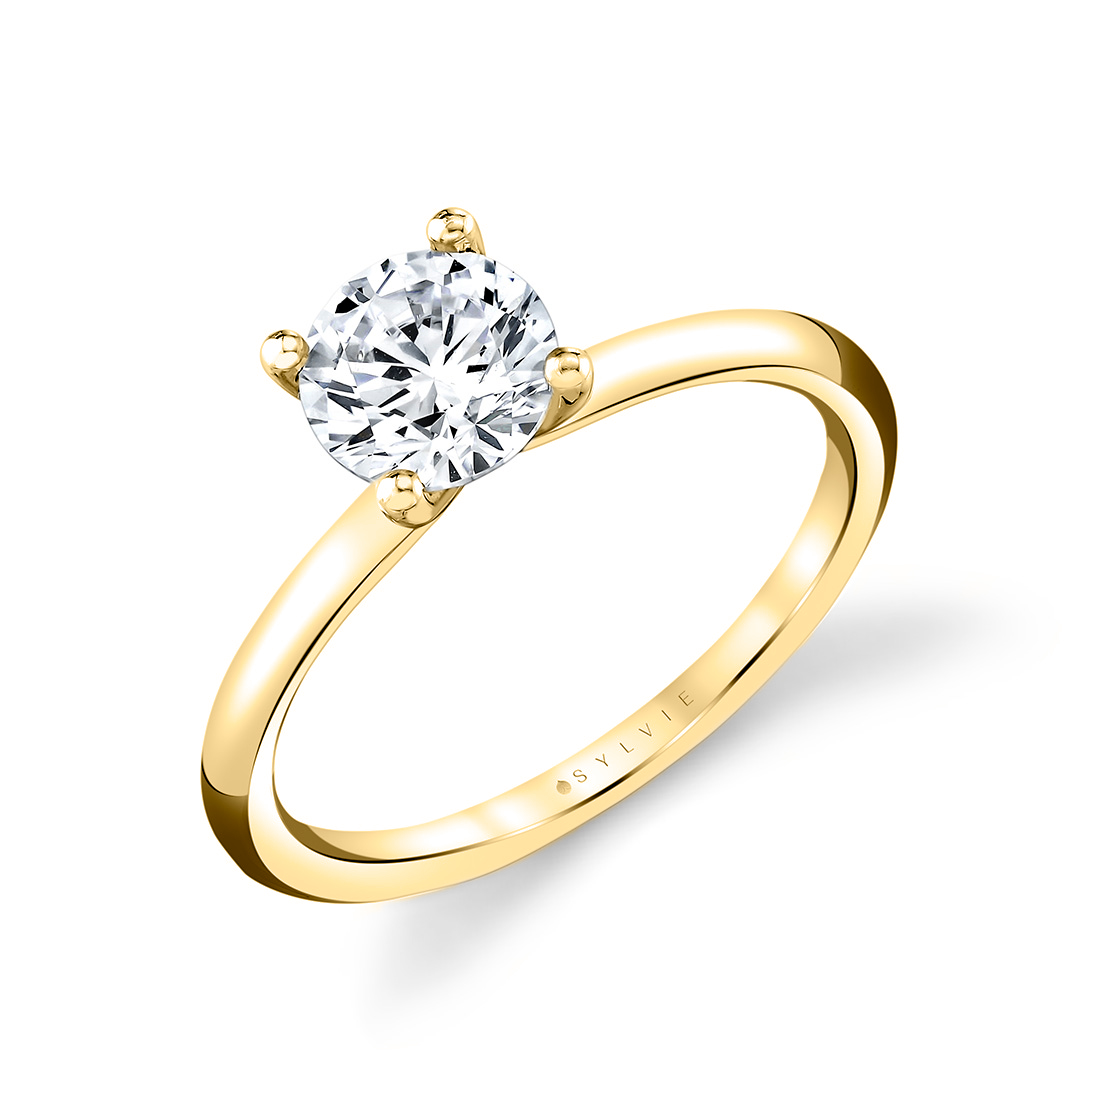 Round Cut Solitaire Engagement Ring - Amelia - Sylvie Jewelry